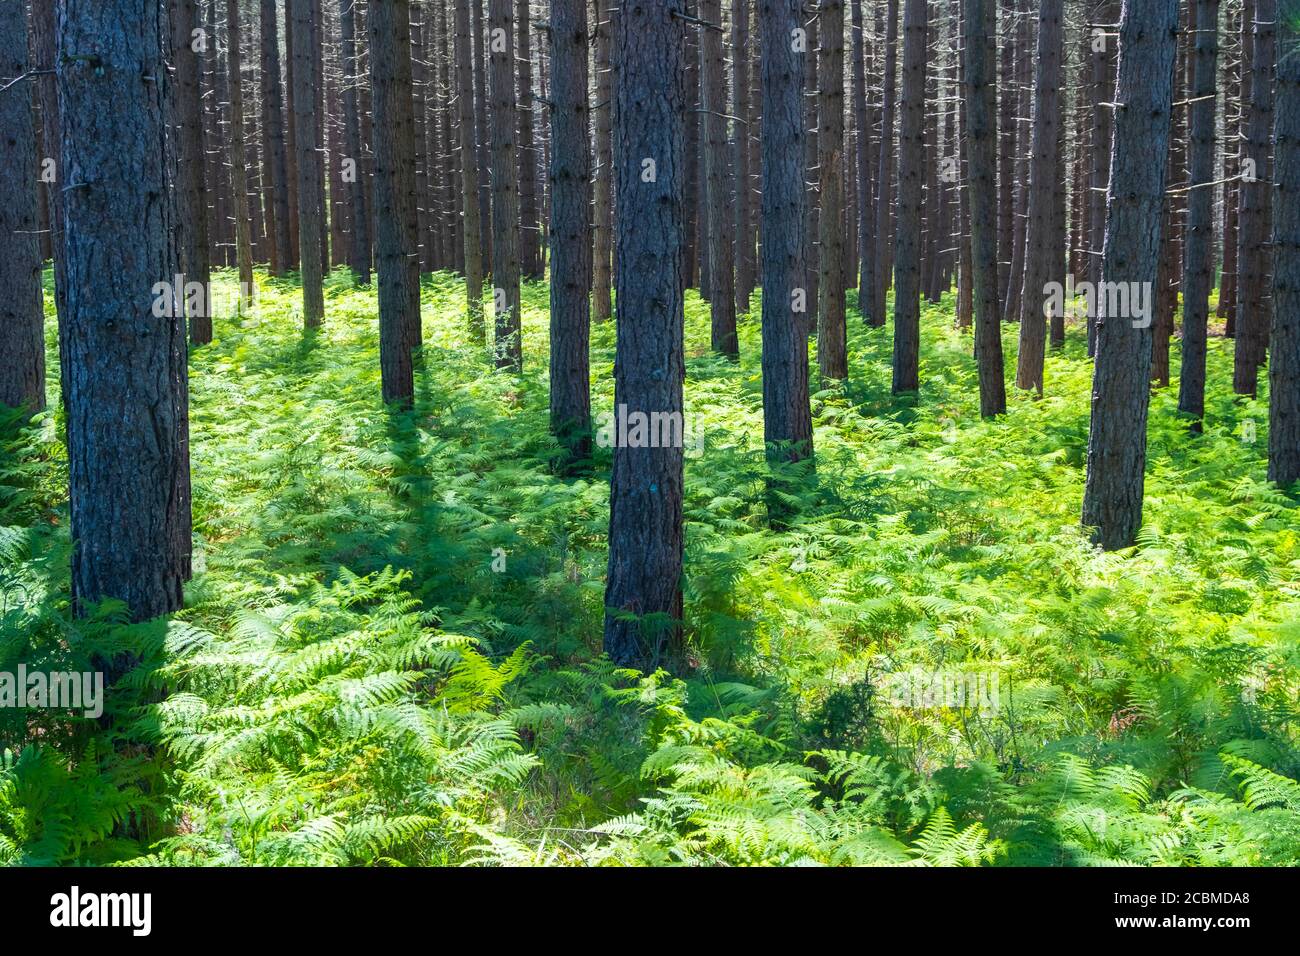 Pine trees forest and ferns. Stock Photo